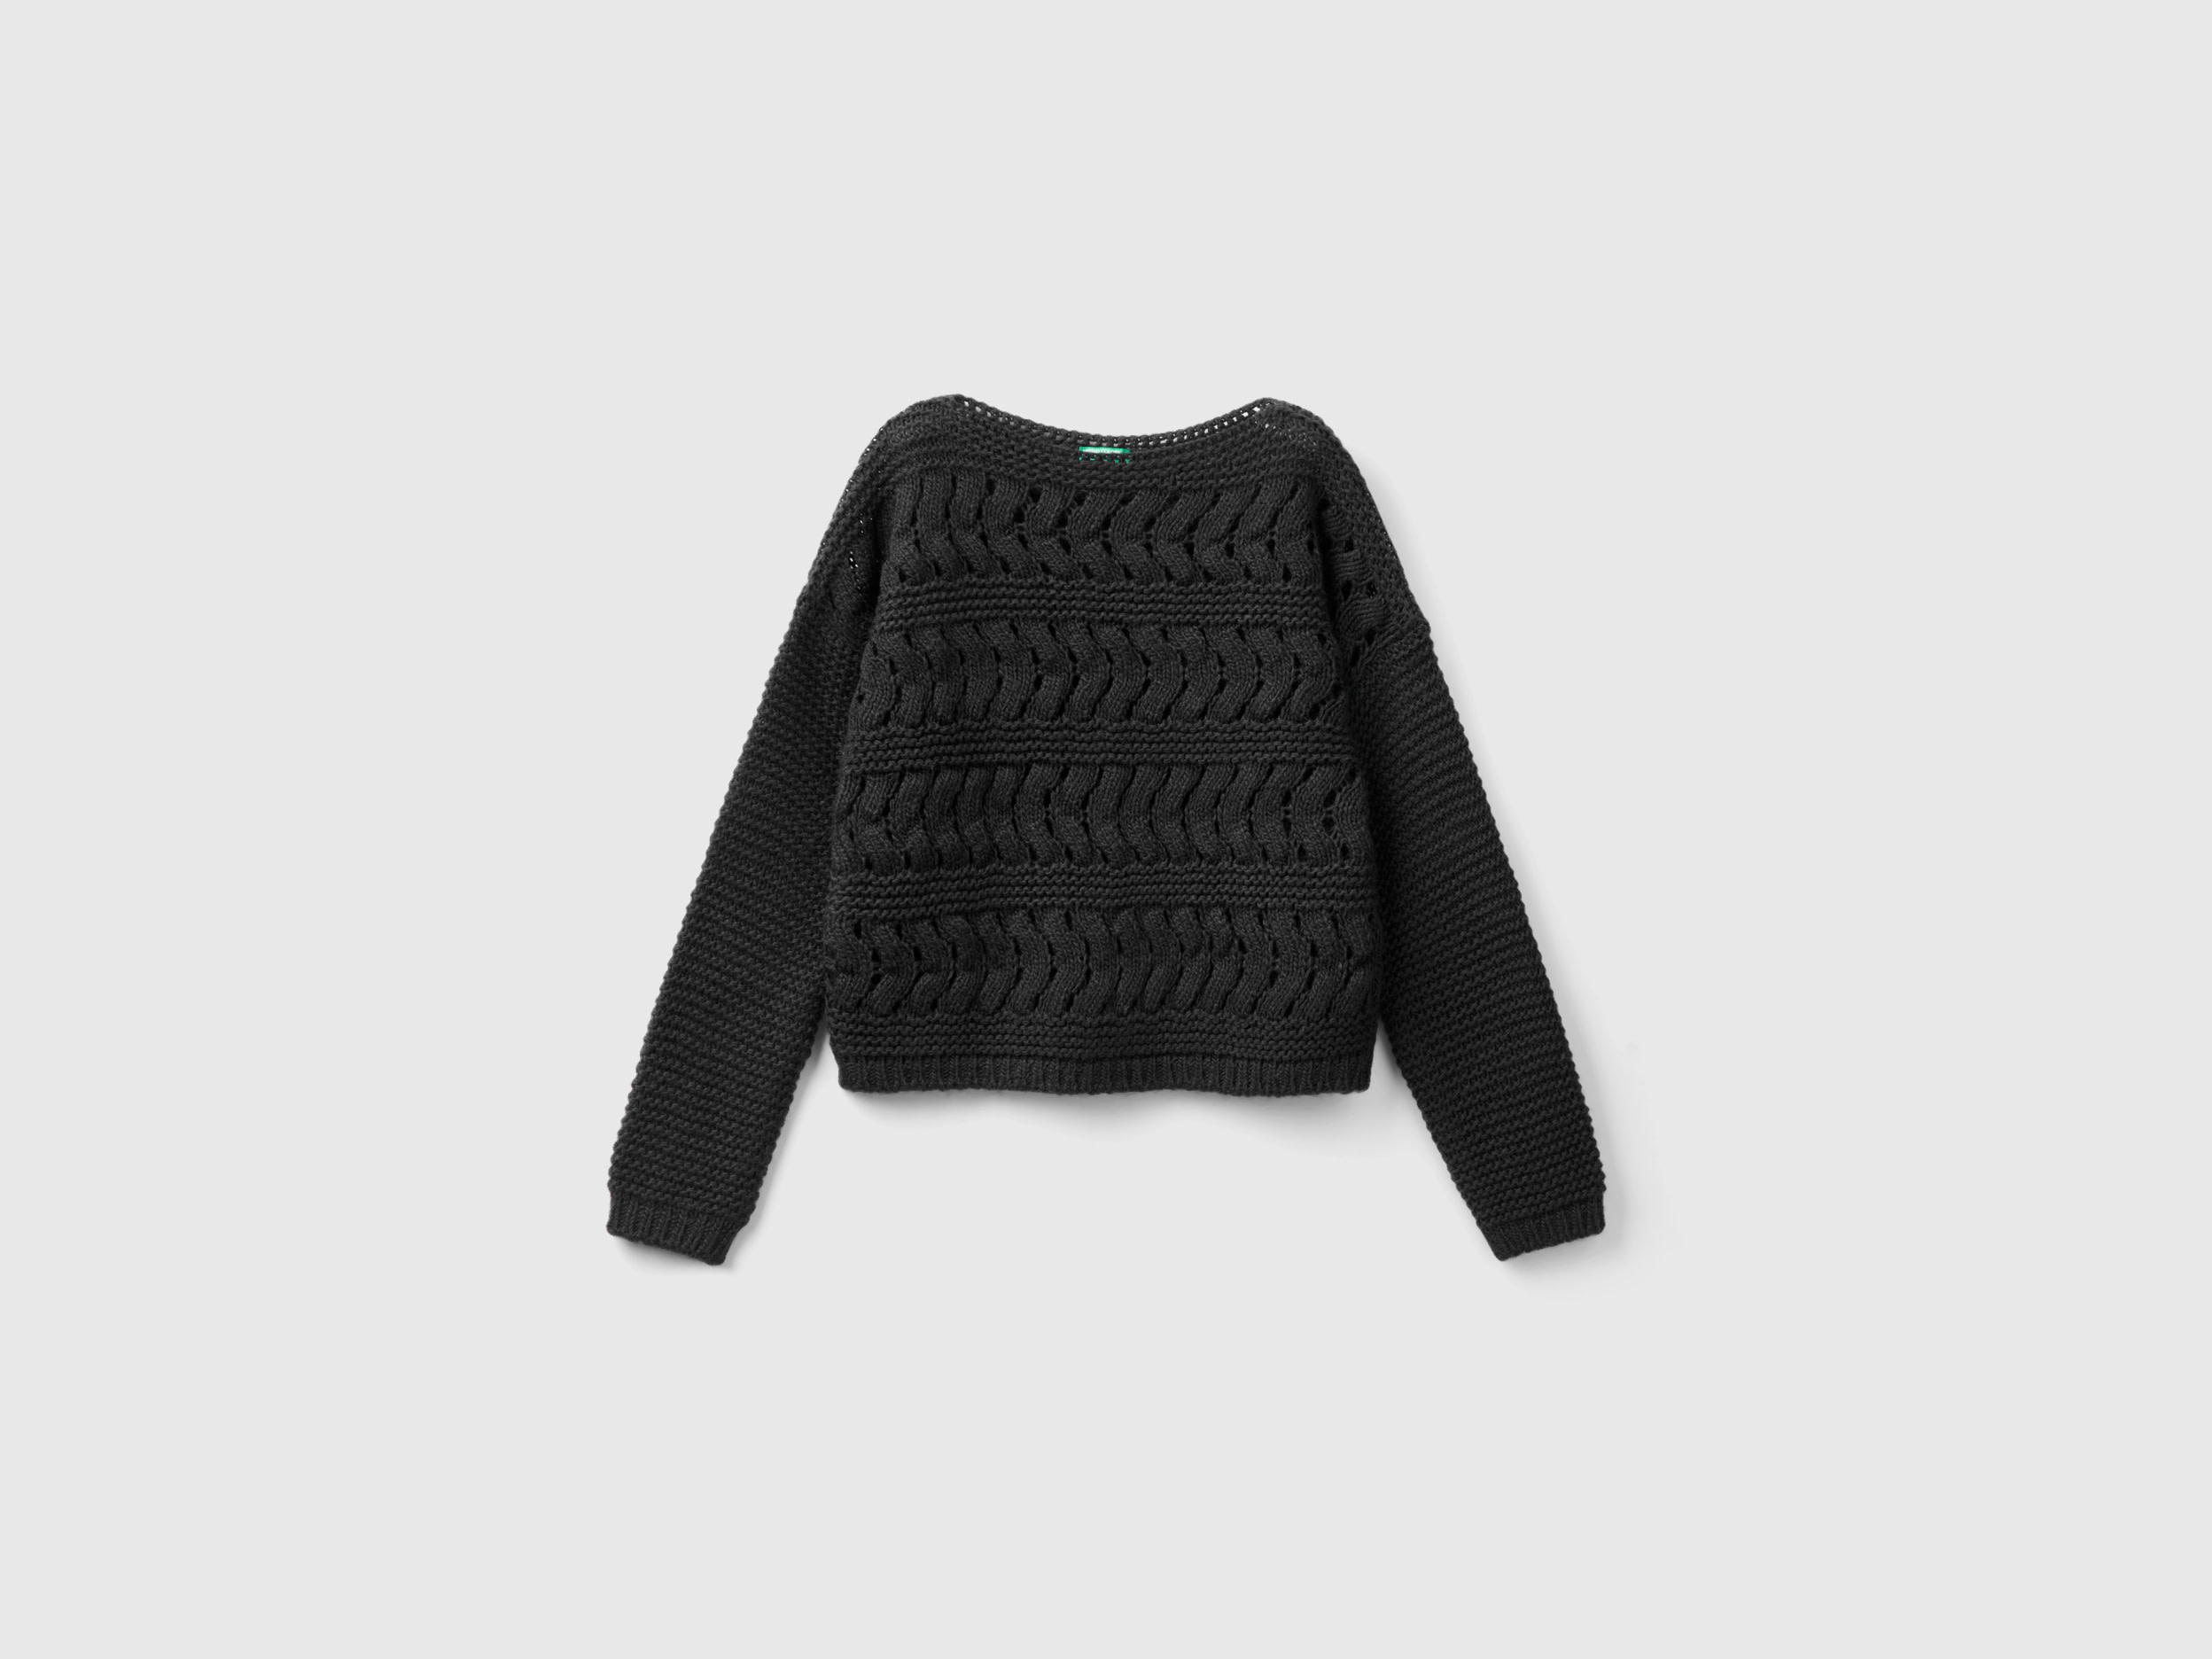 Benetton, Cable Knit Sweater In Wool Blend, size S, Black, Kids